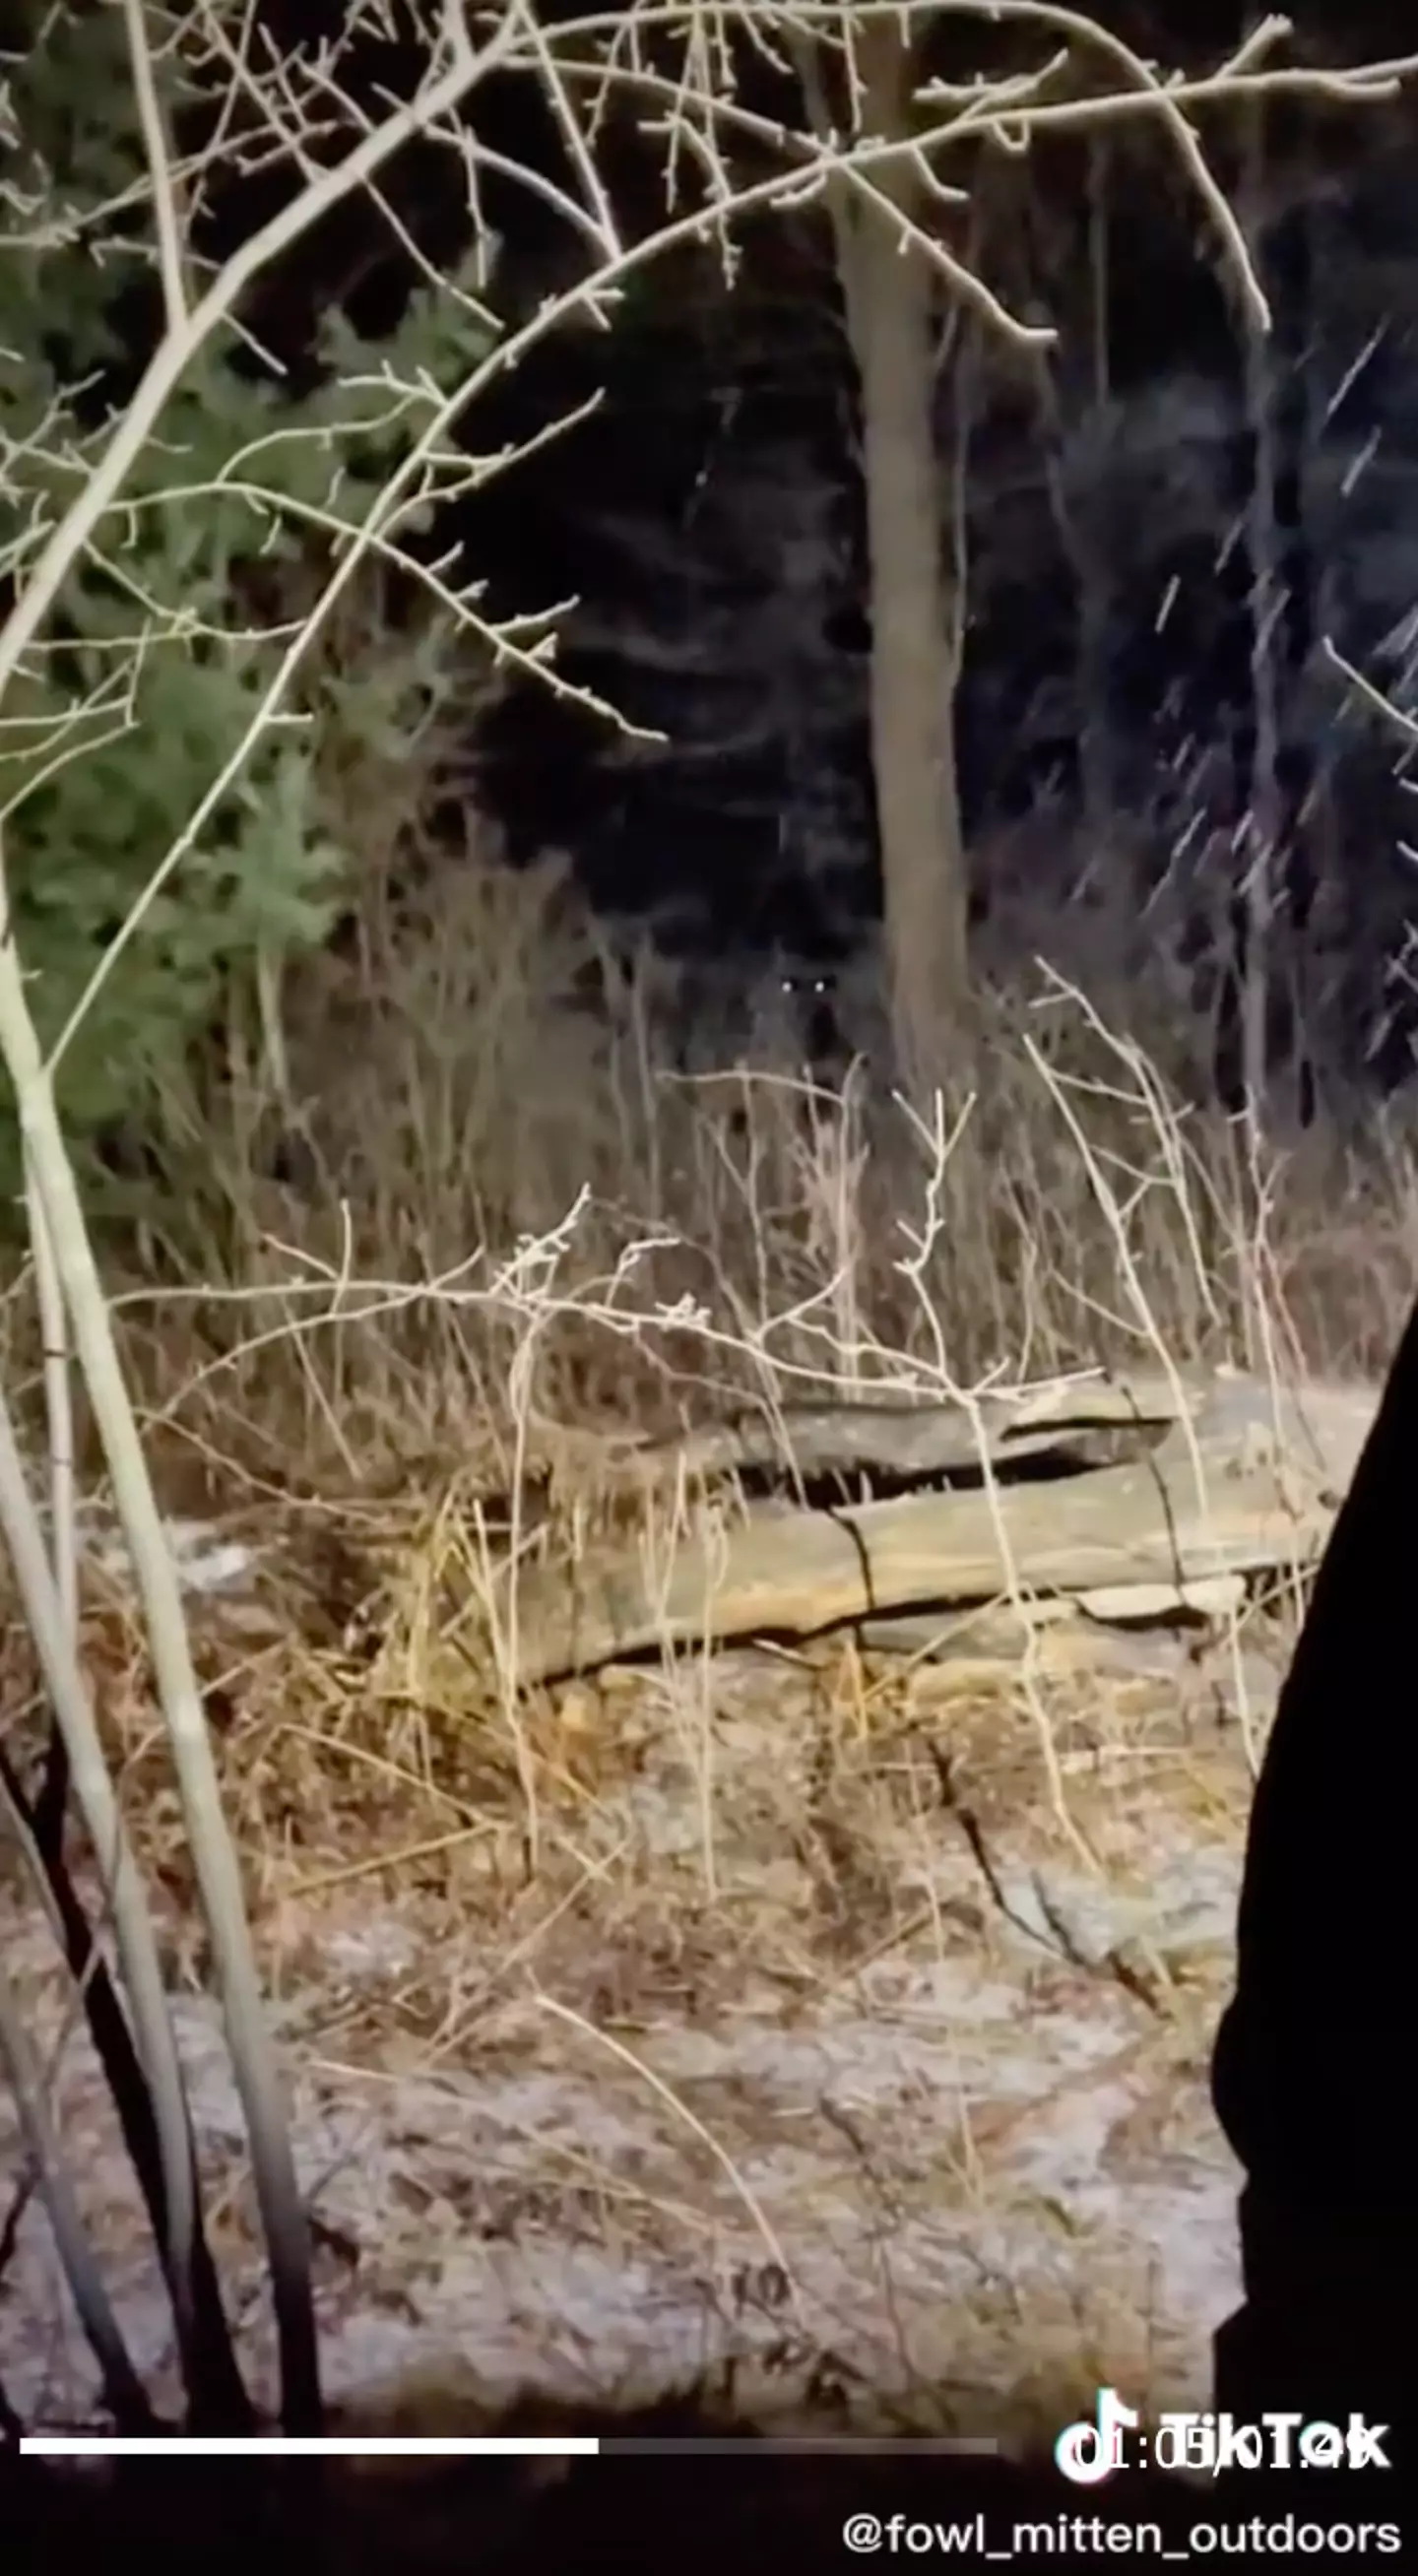 In one of Dostert’s videos, glowing eyes can be seen peering out of woodland.